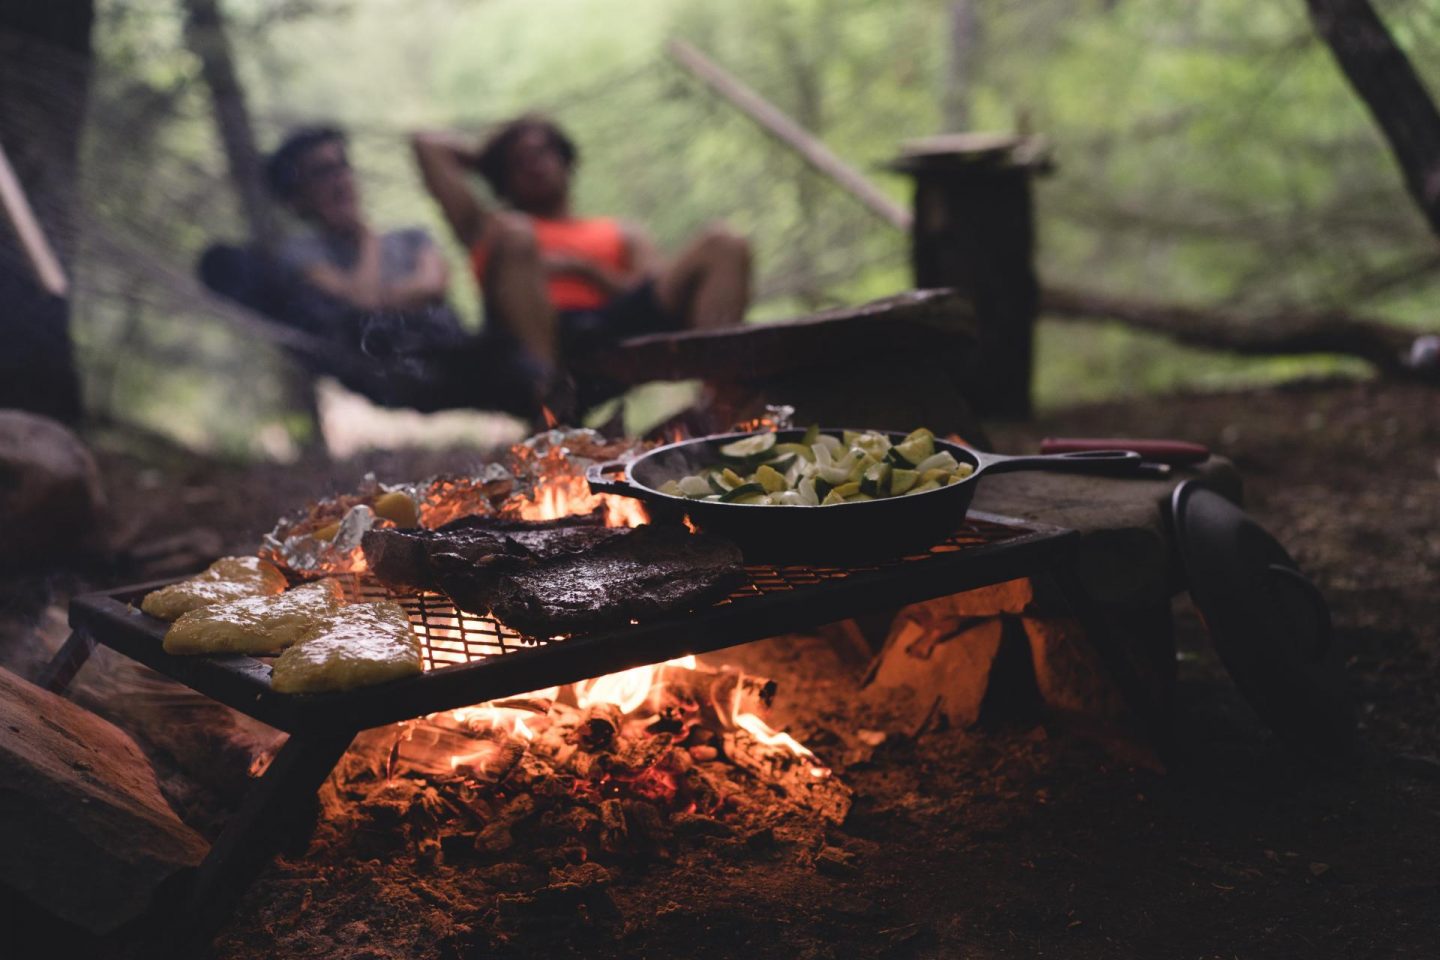 Cooking tips and hacks for campers: How to cook up a feast on your next camping adventure